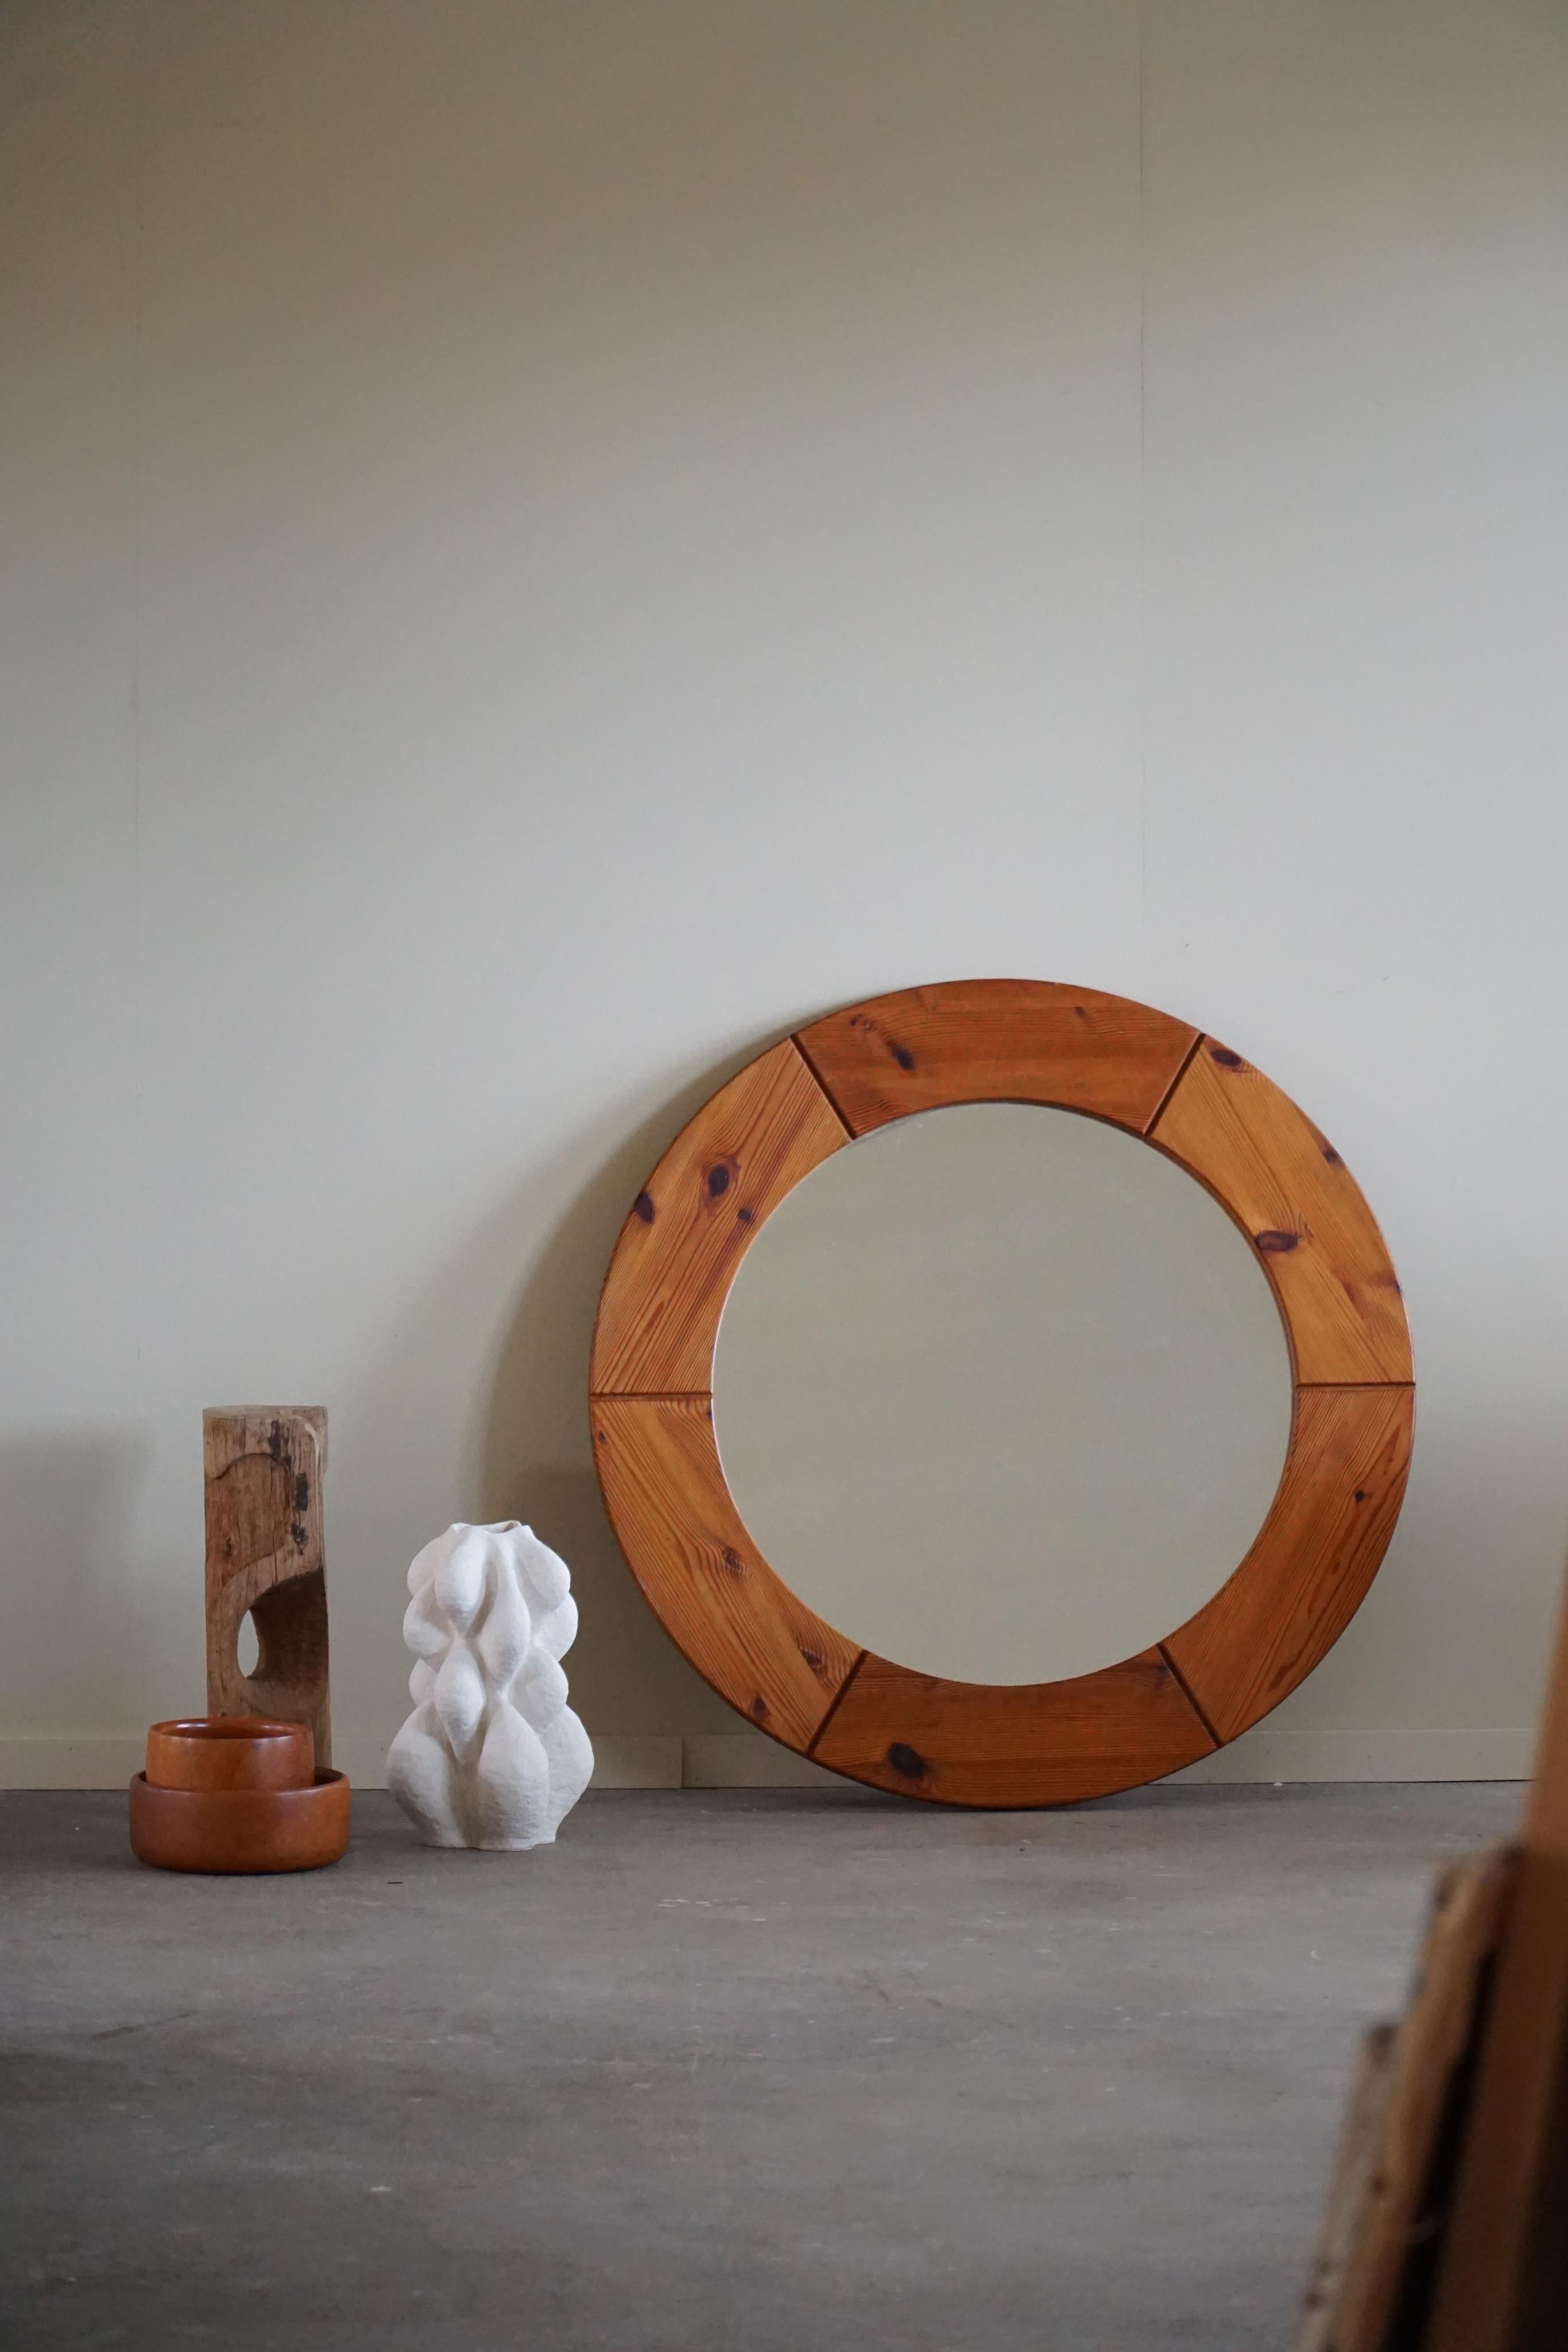 Large Round wall mirror in solid pine by Glasmäster Markaryd, Sweden, 1960. Labeled on the backside. The pine frame has a warm and natural finish, with the natural wood grain and knots adding a sense of depth and character to the piece. The frame is